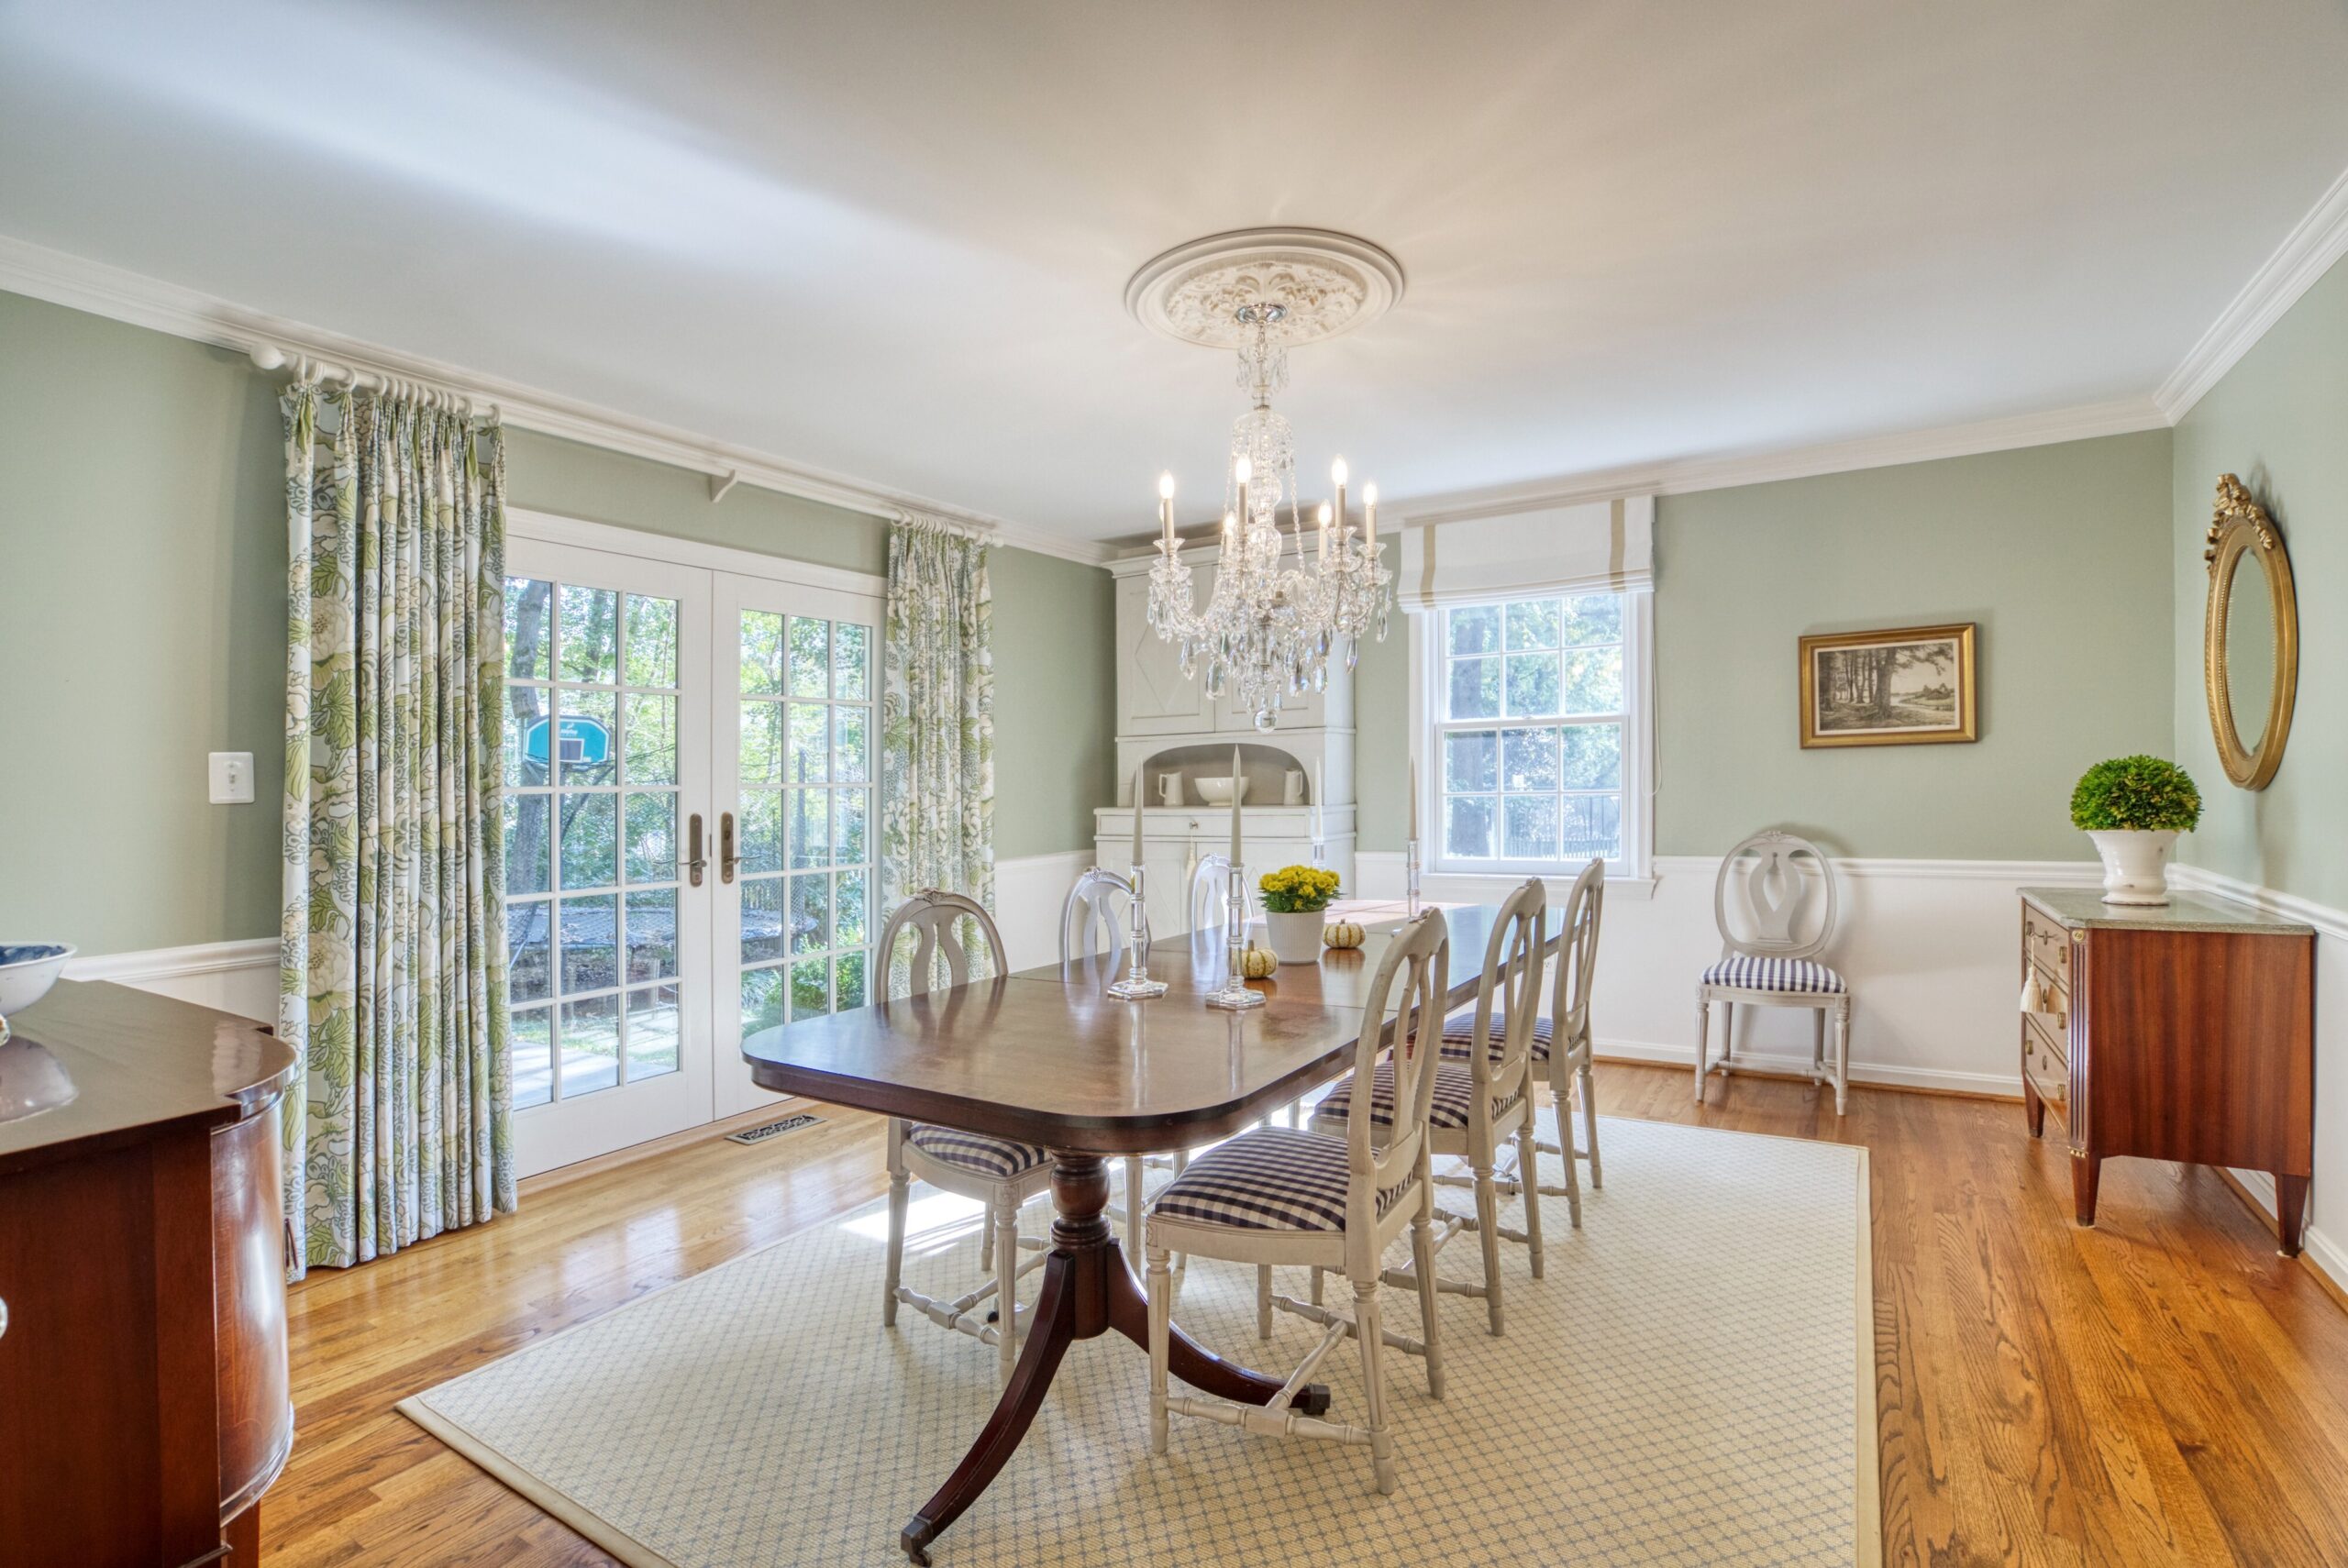 Professional interior photo of 8305 River Falls Dr, Potomac, MD - showing formal dining room with chanedlier, hardwood floors, and mint green and off white colors